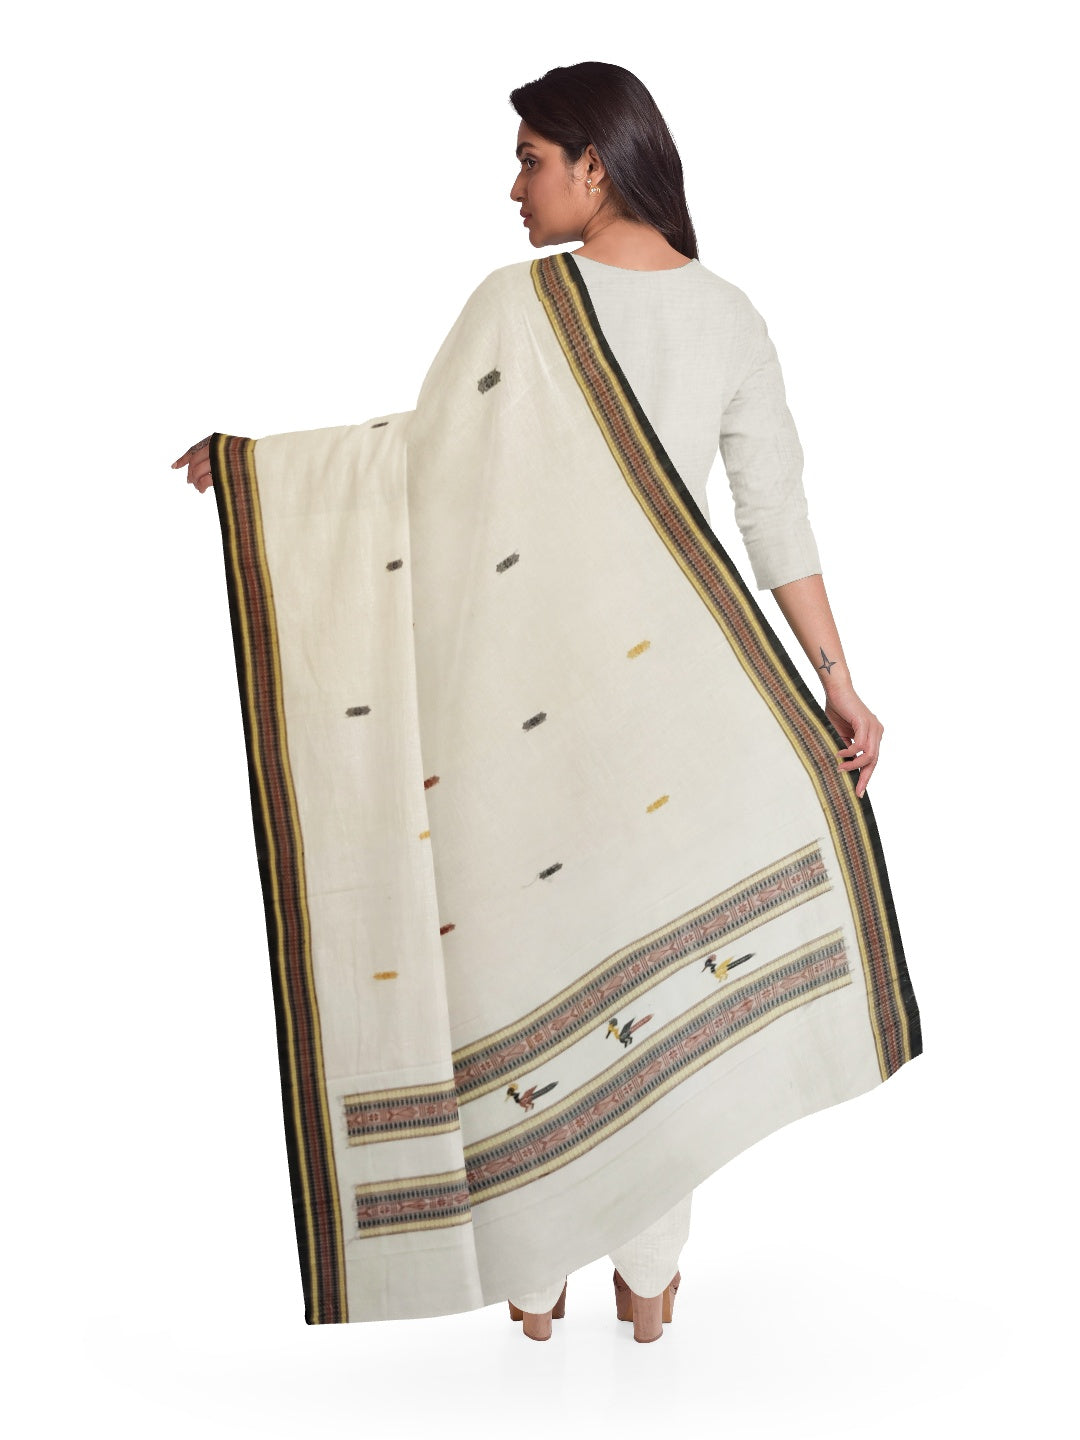 Off-white dongria Cotton Dupatta with geometric patterns